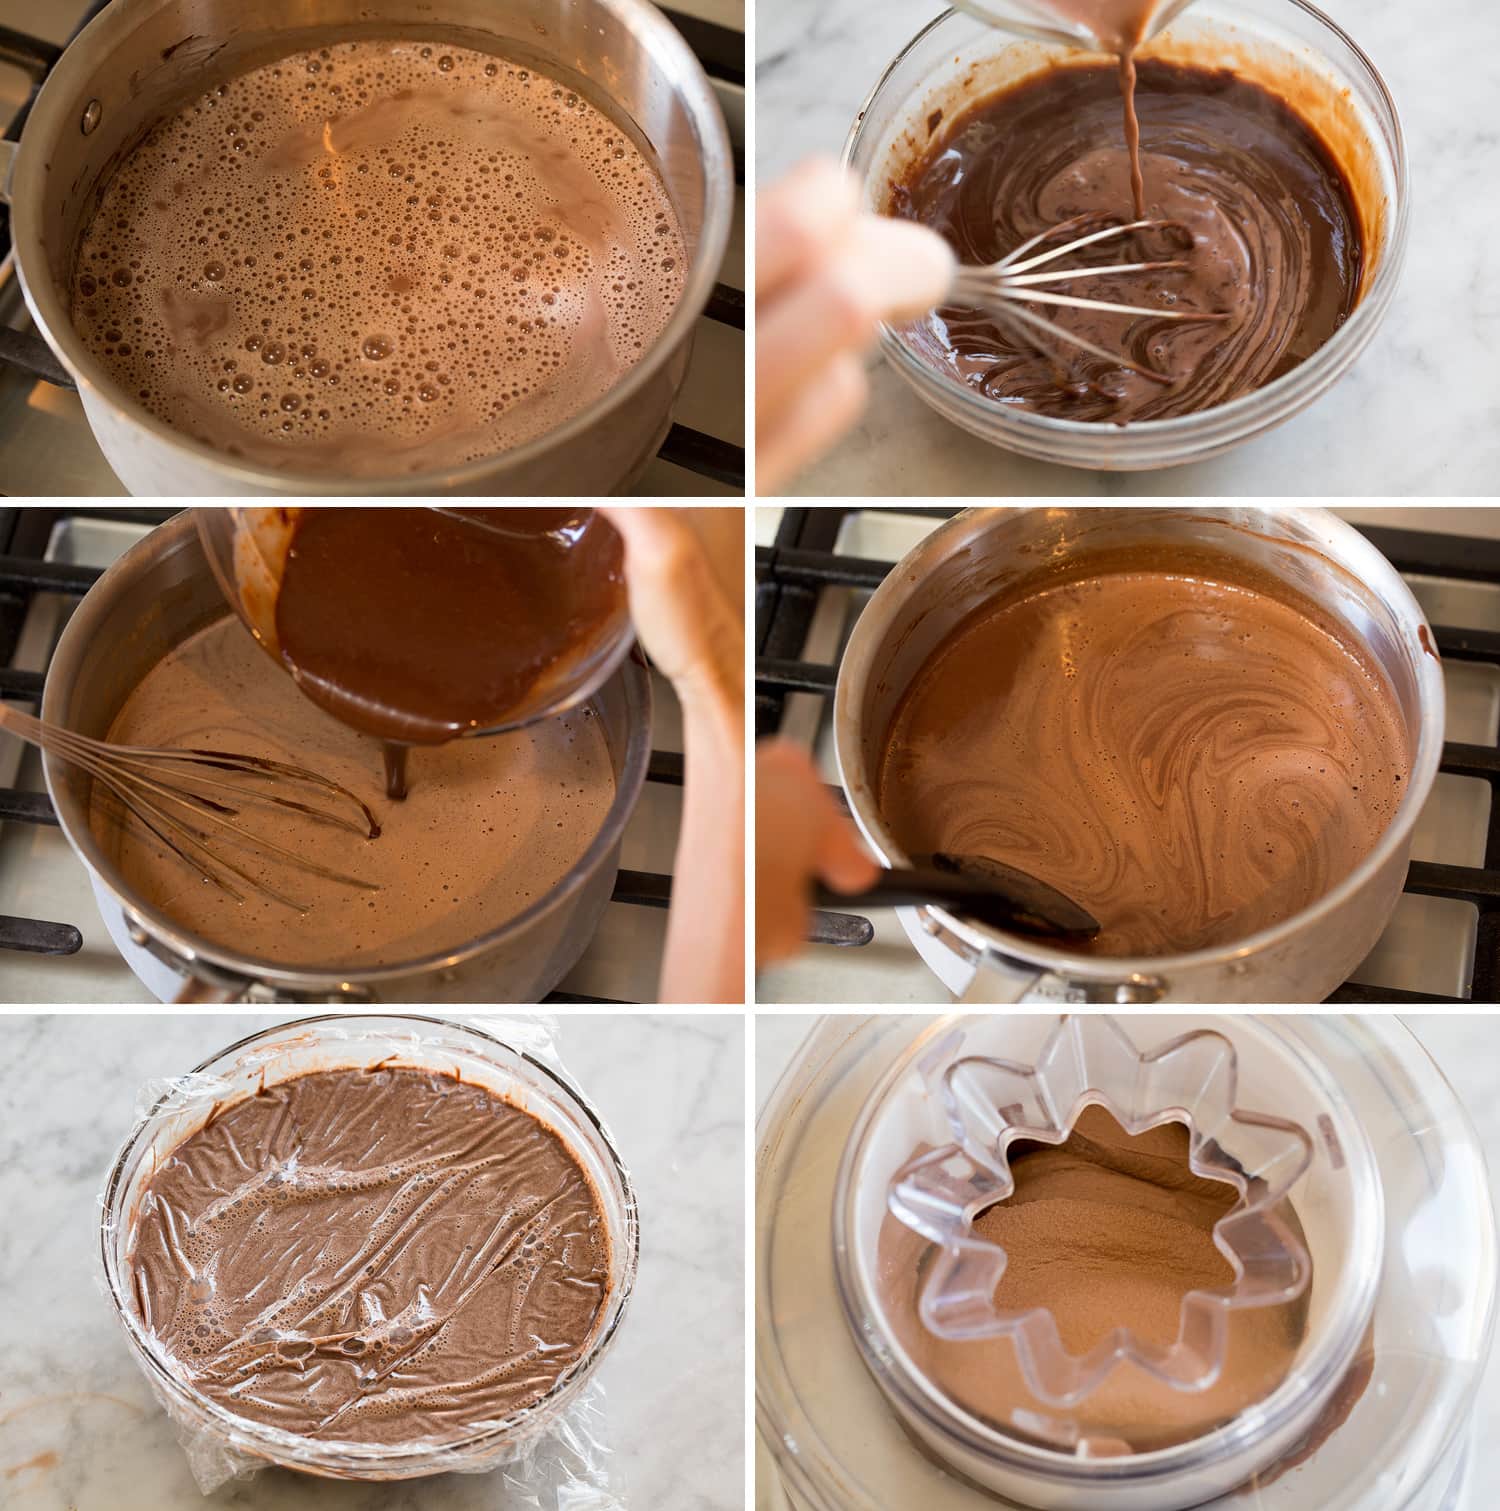 Continued steps of making homemade chocolate ice cream in pan and ice cream maker.